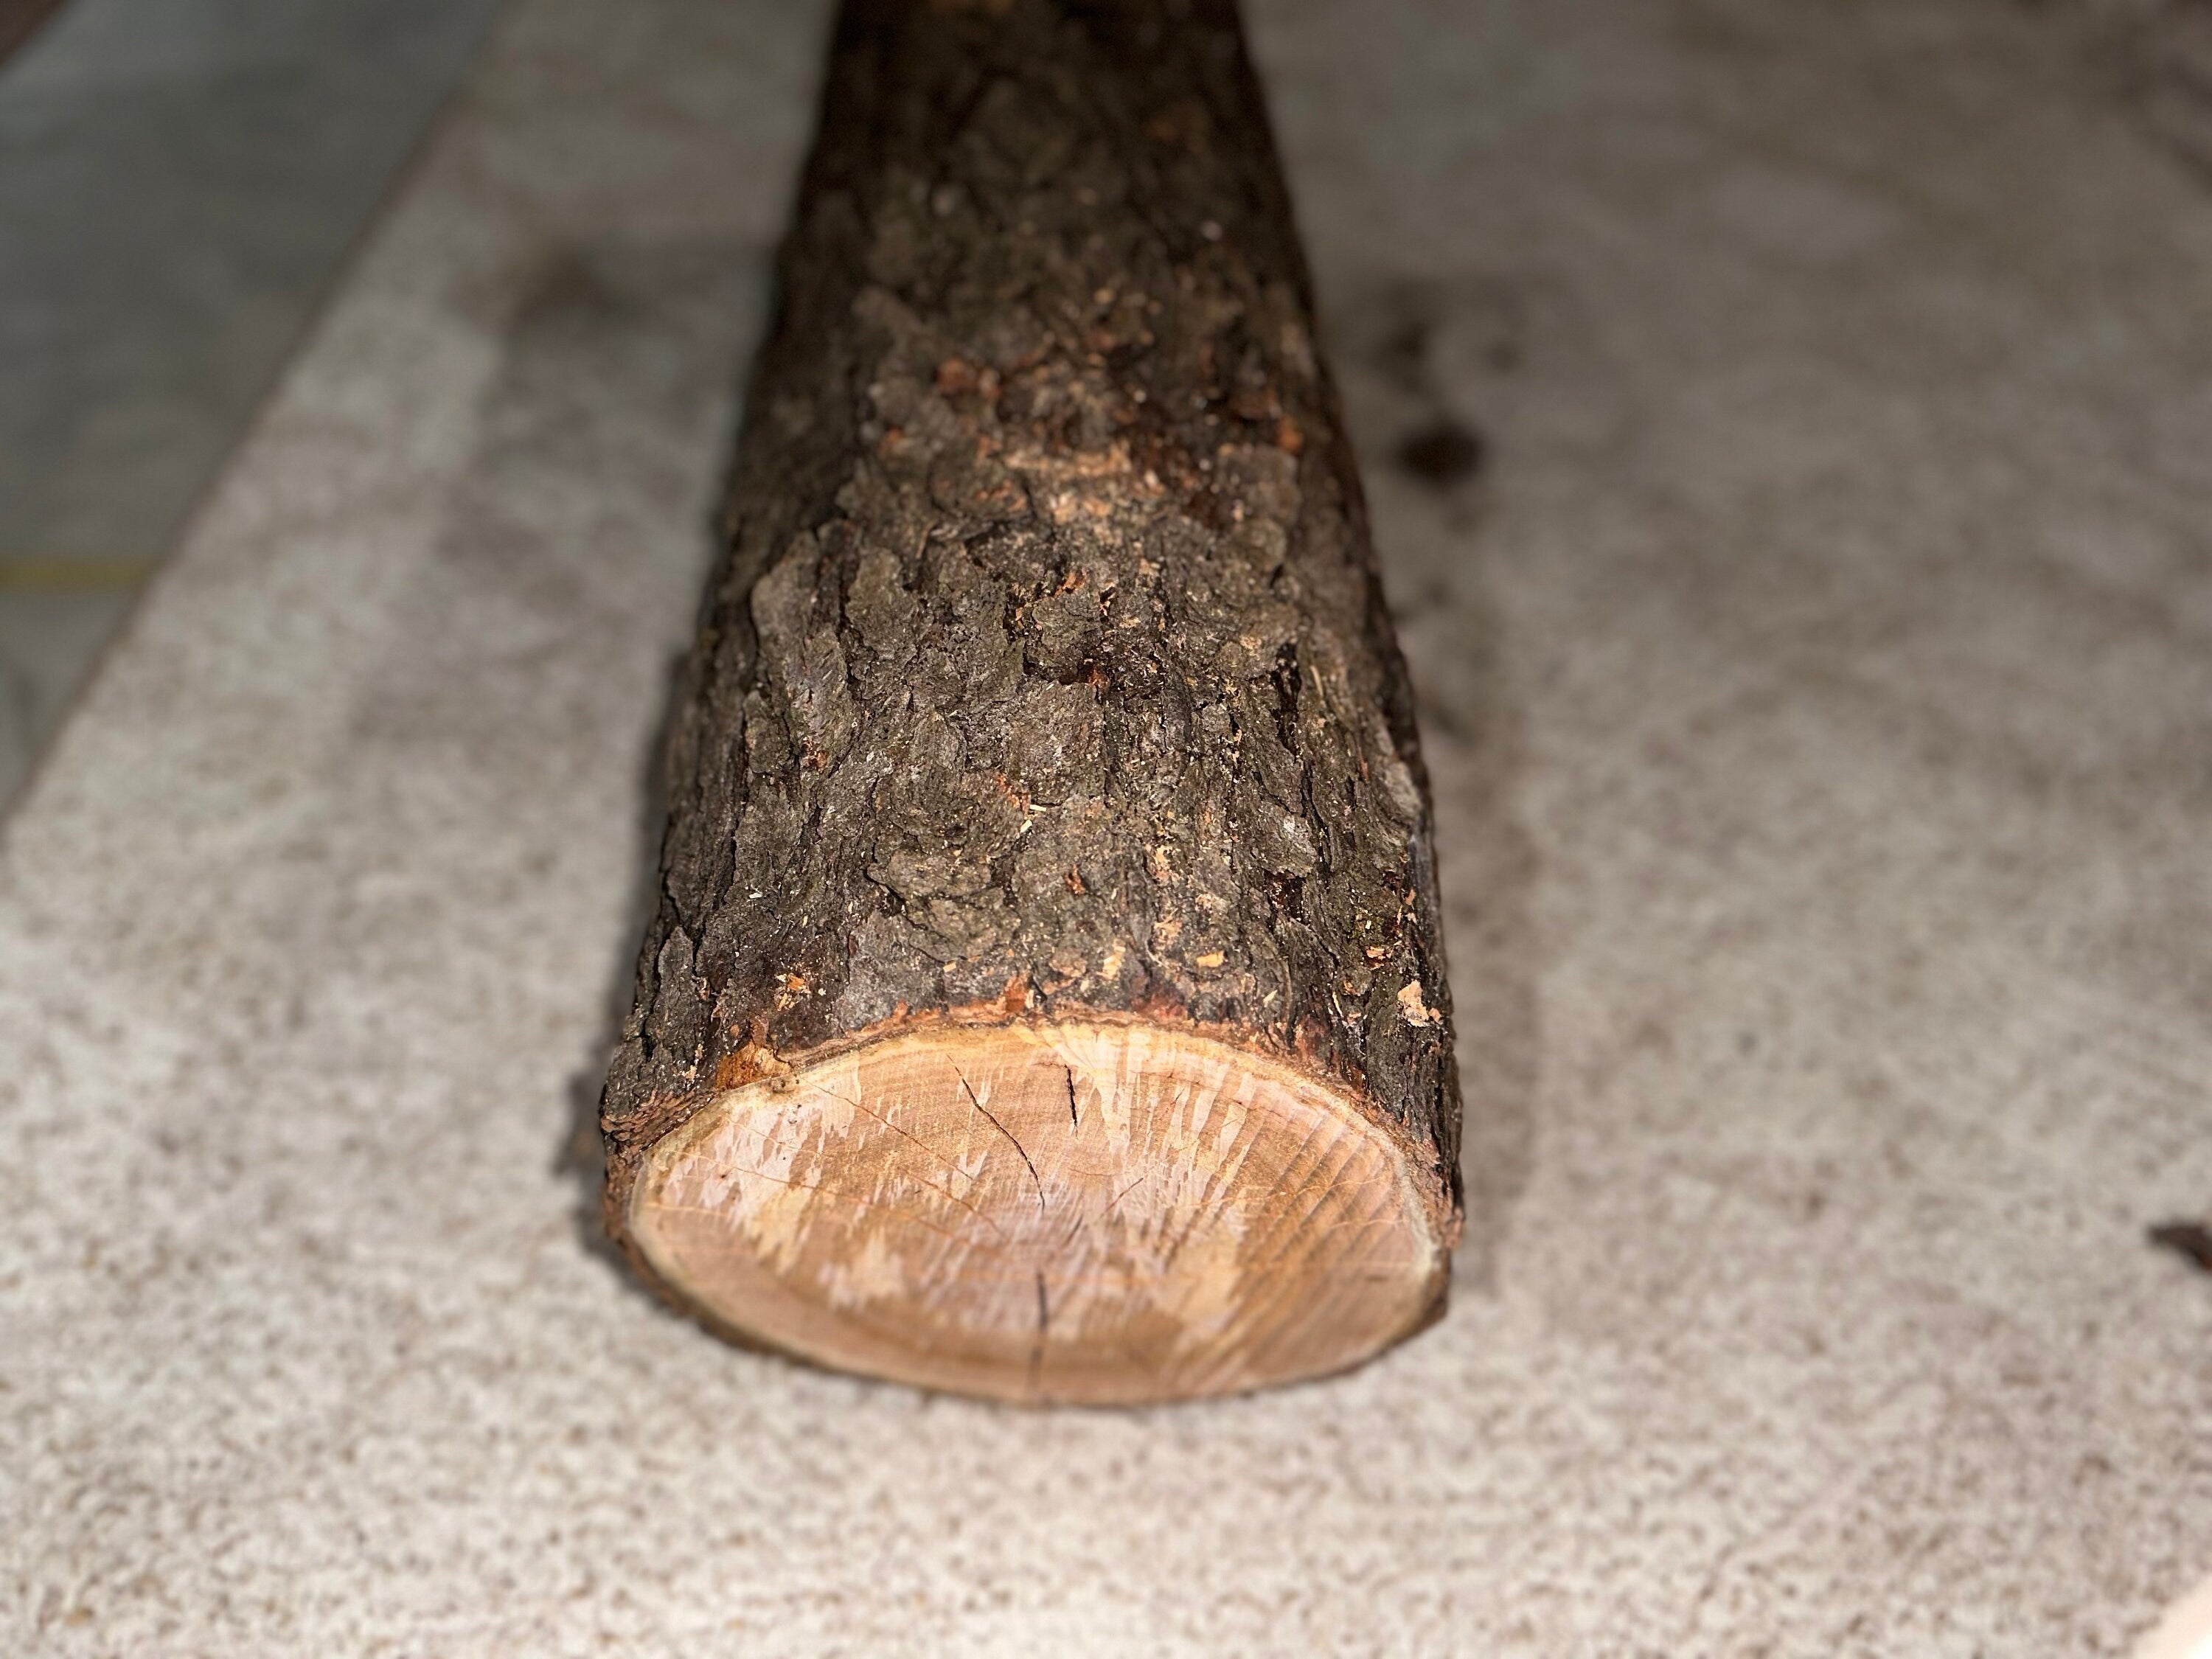 Cherry Log, 28 Inches Long by Approximately 9.5 Inches Wide and 8.5 Inches Tall, Black Cherry, American Cherry, Prunus Serotina